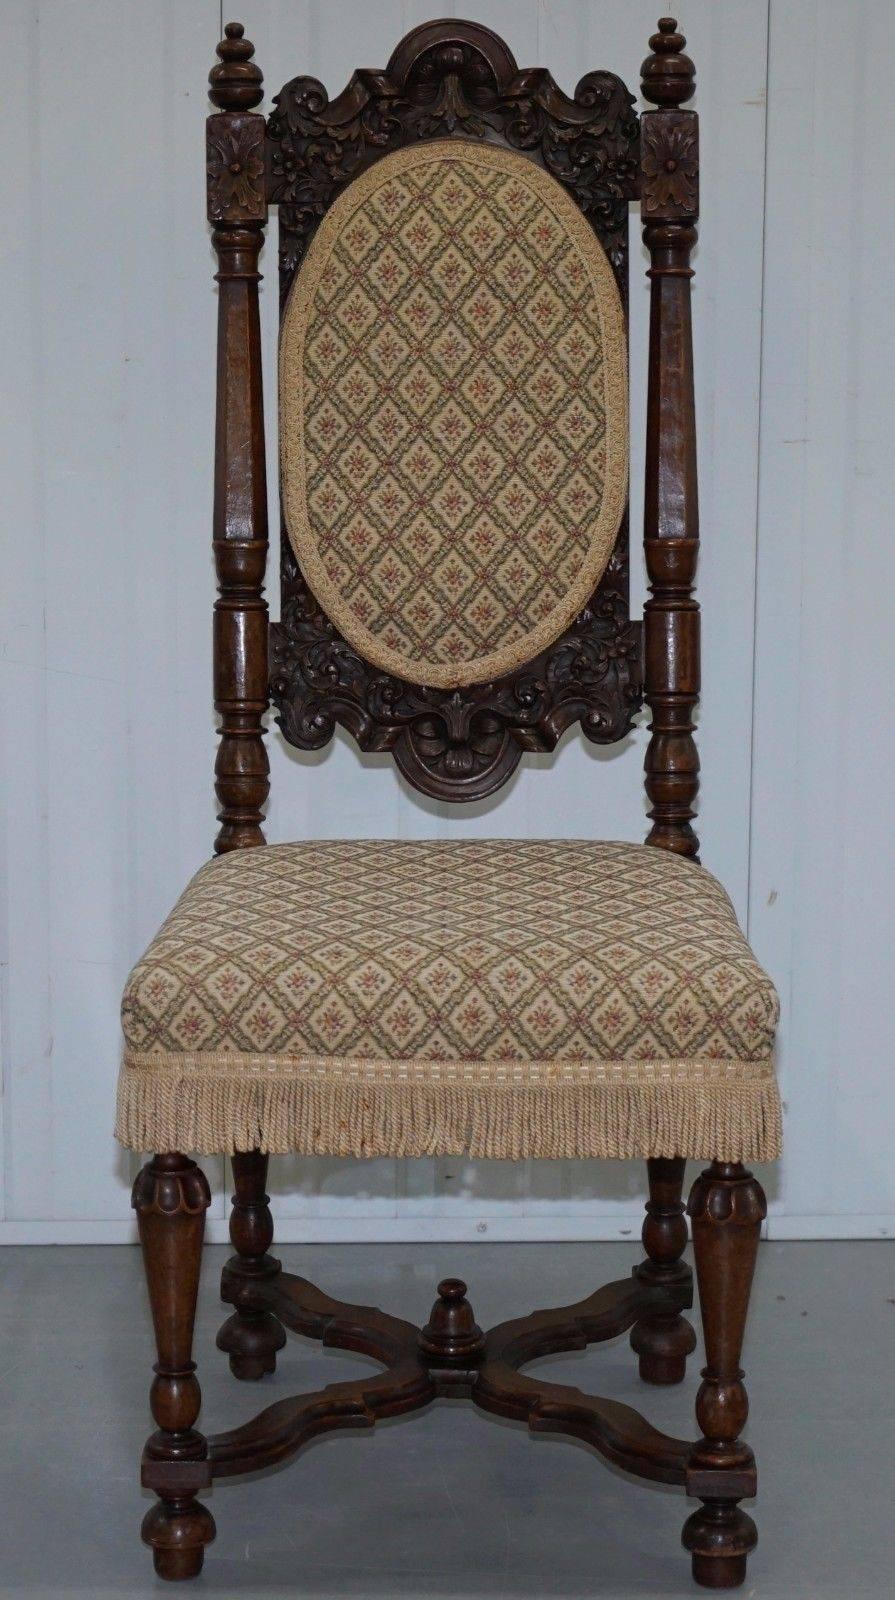 We are delighted to offer for sale this lovely William & Mary circa 1600’s high back carved walnut chair

A good looking and well-made piece, nicely carved and looking good from every angle, the chair has original Victorian repairs in the form of